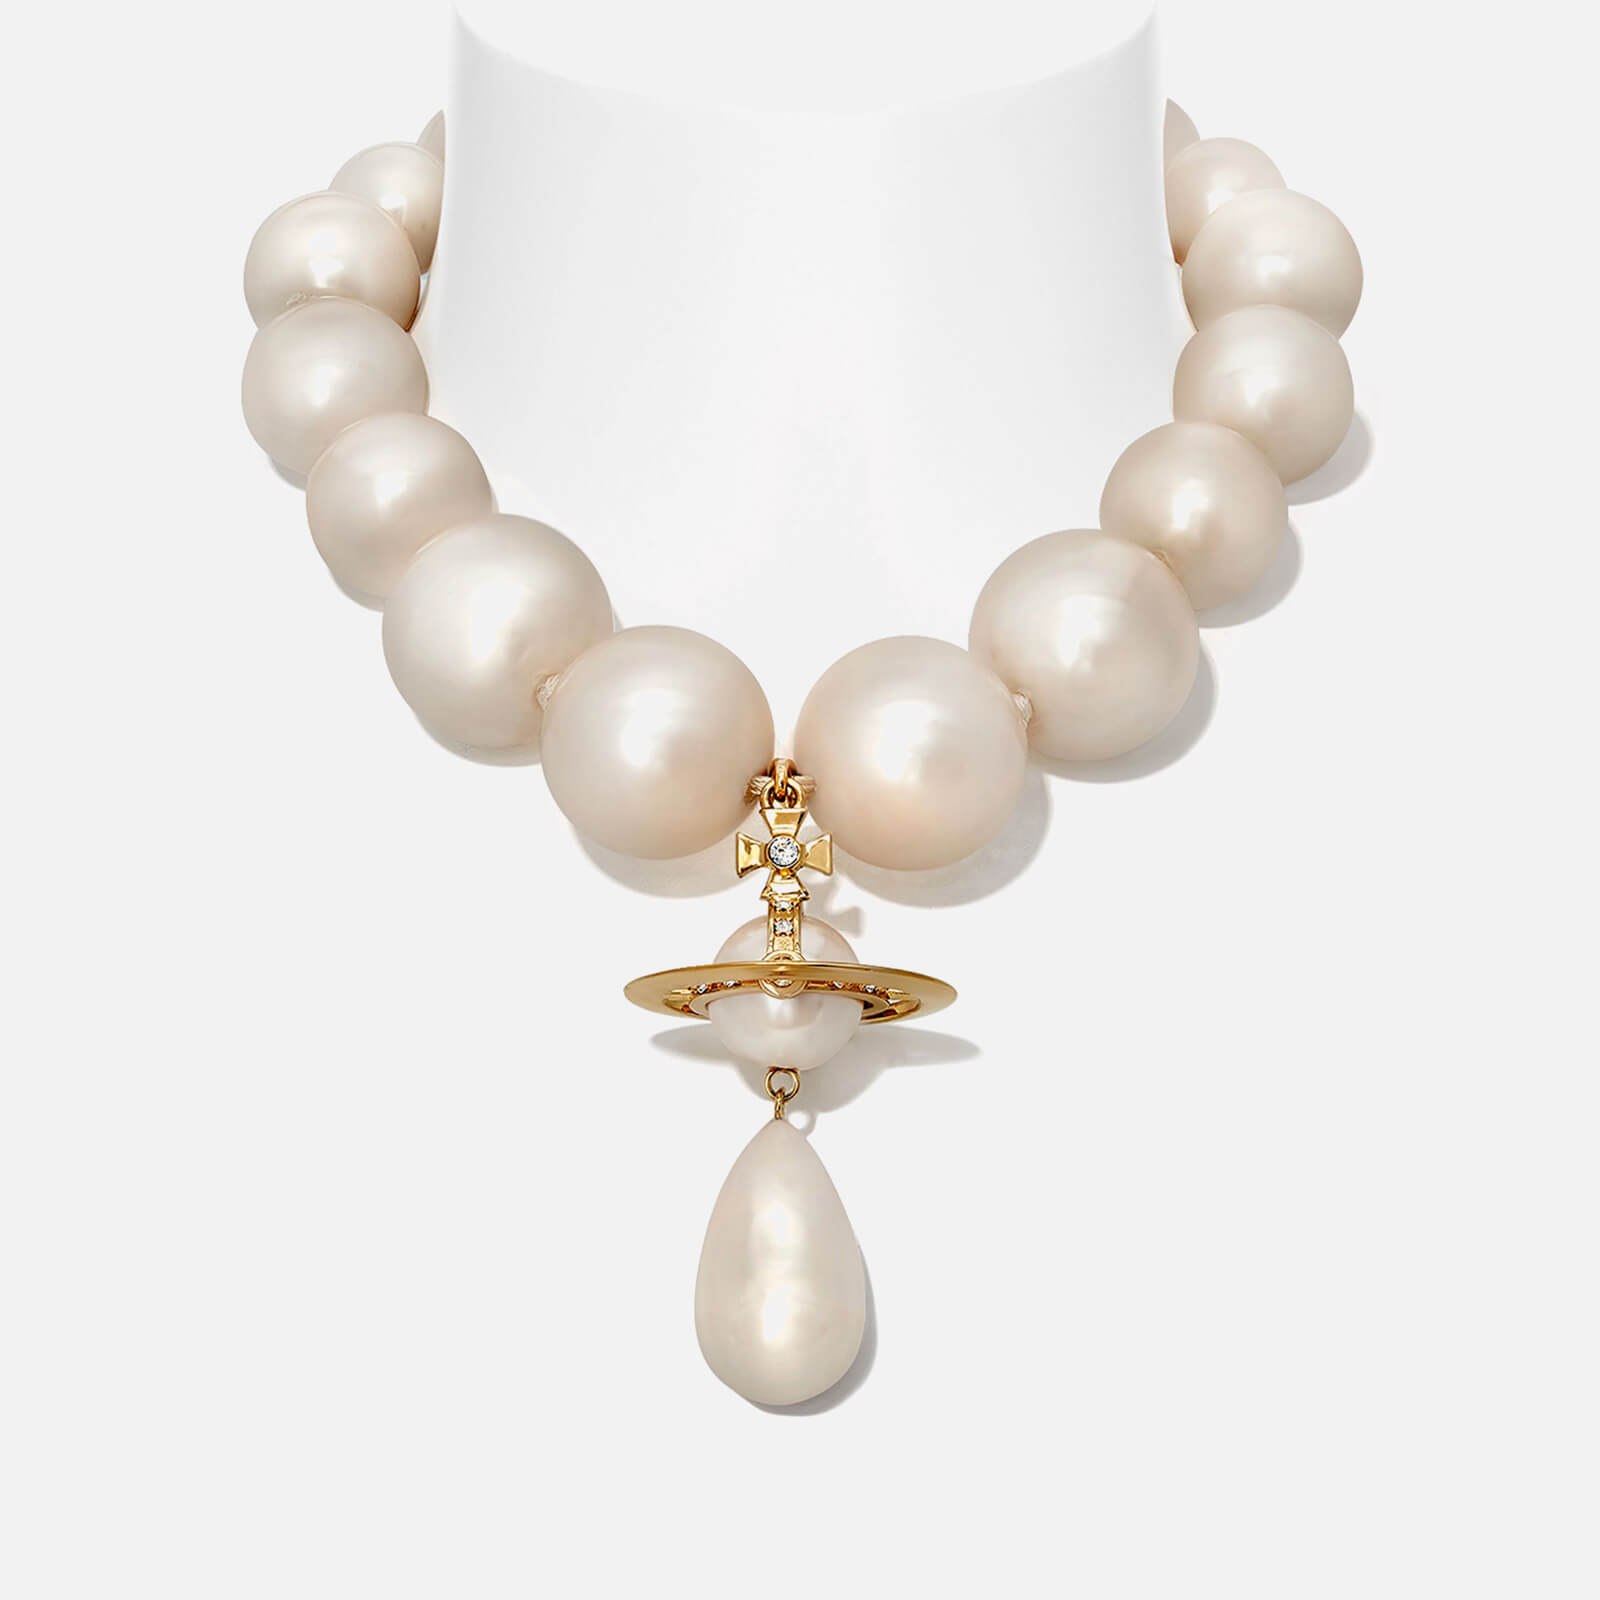 Vivienne Westwood Women's Giant Pearl Drop Necklace - Gold/Cream product